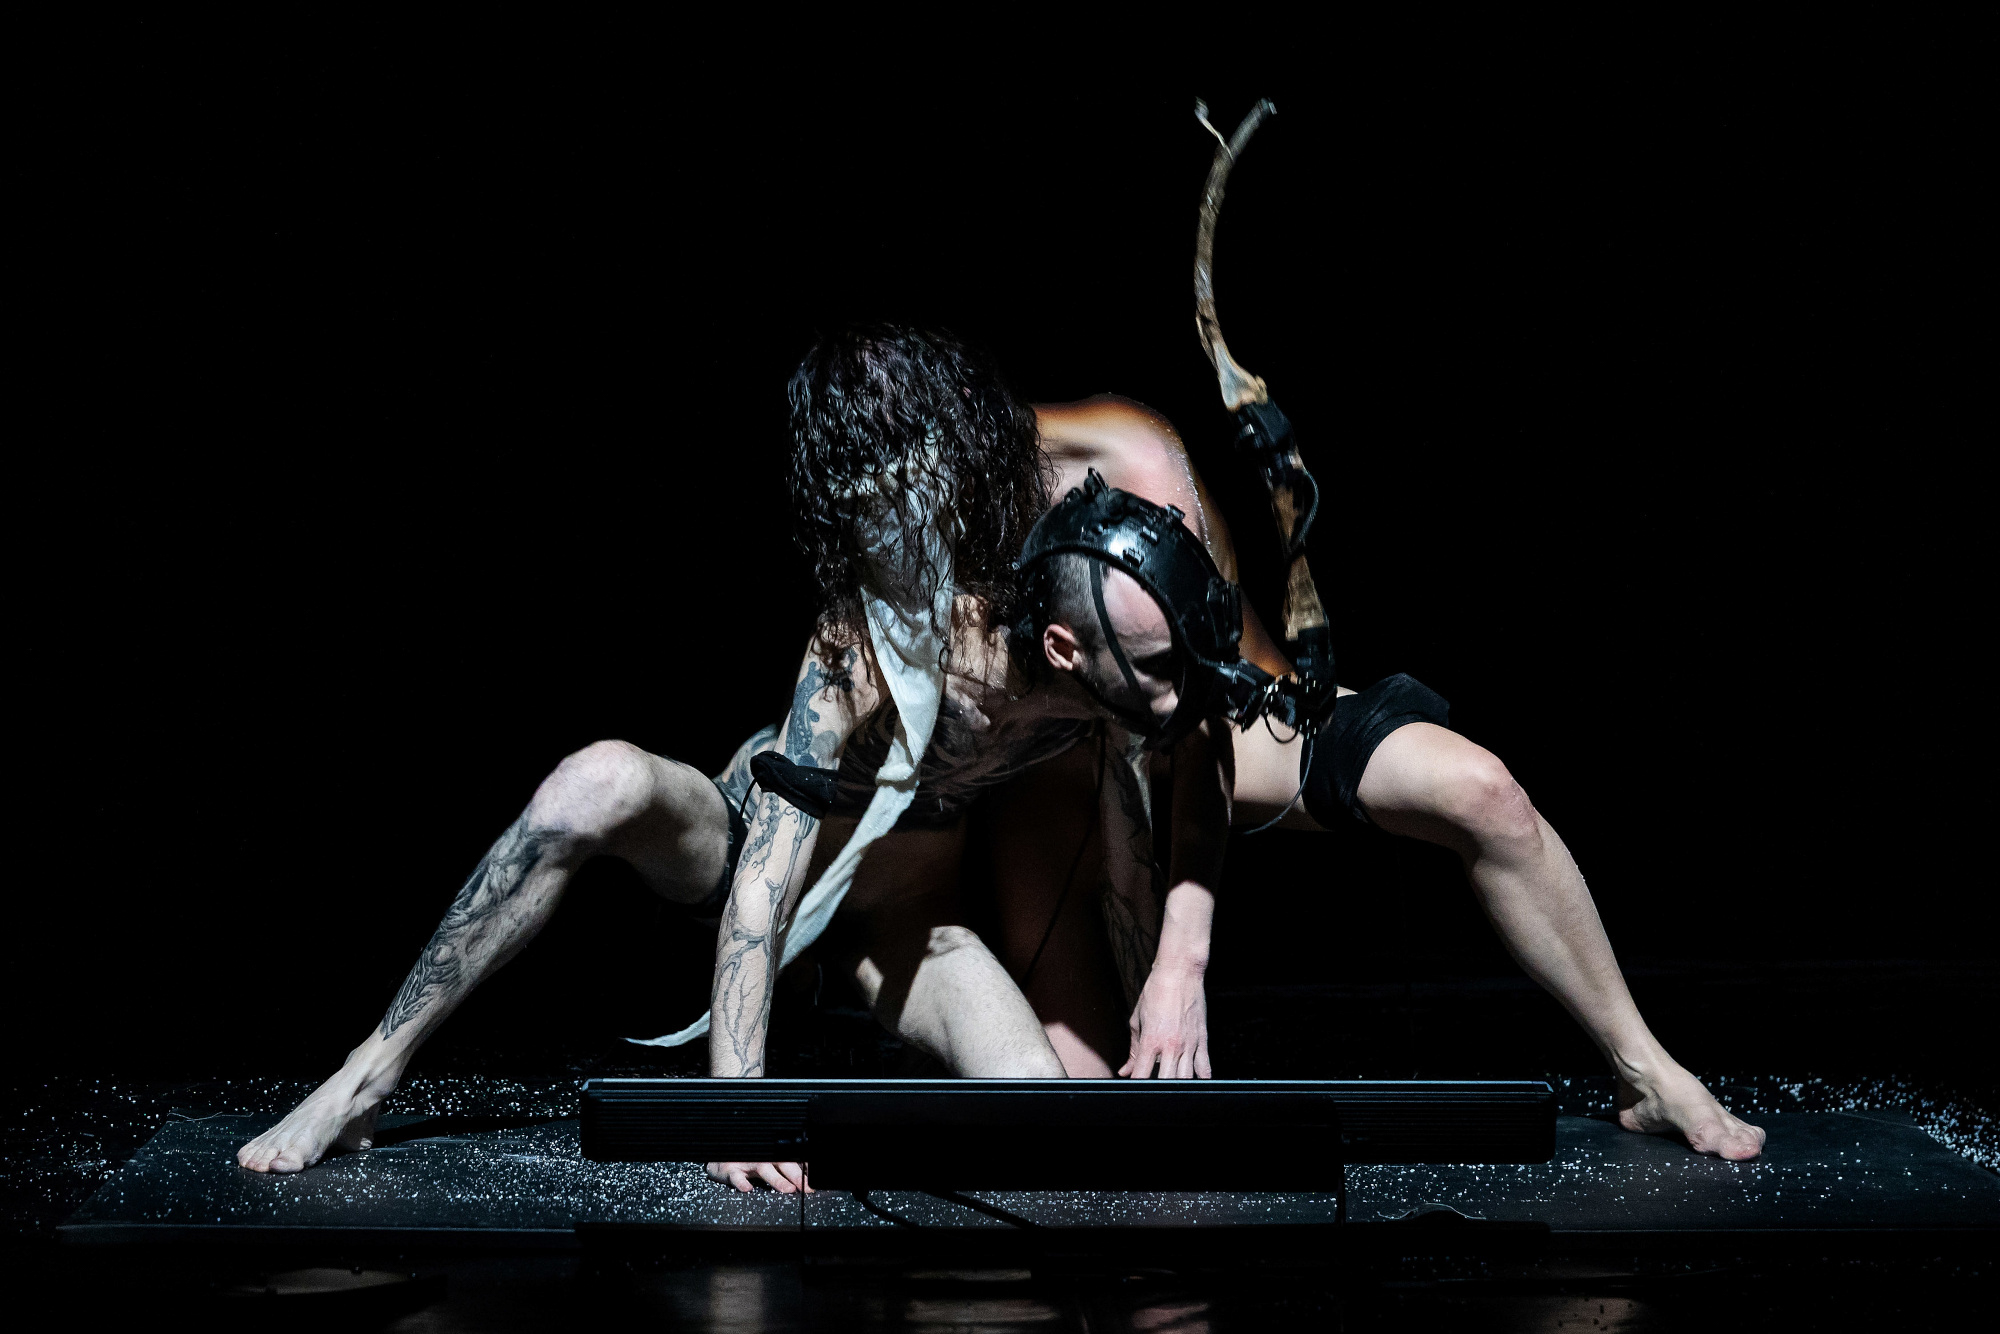 Two performers on a black stage, dramatic dancing close to each other on the floor. Both have covered faces, one with a prosthetic and the other one with cloth.